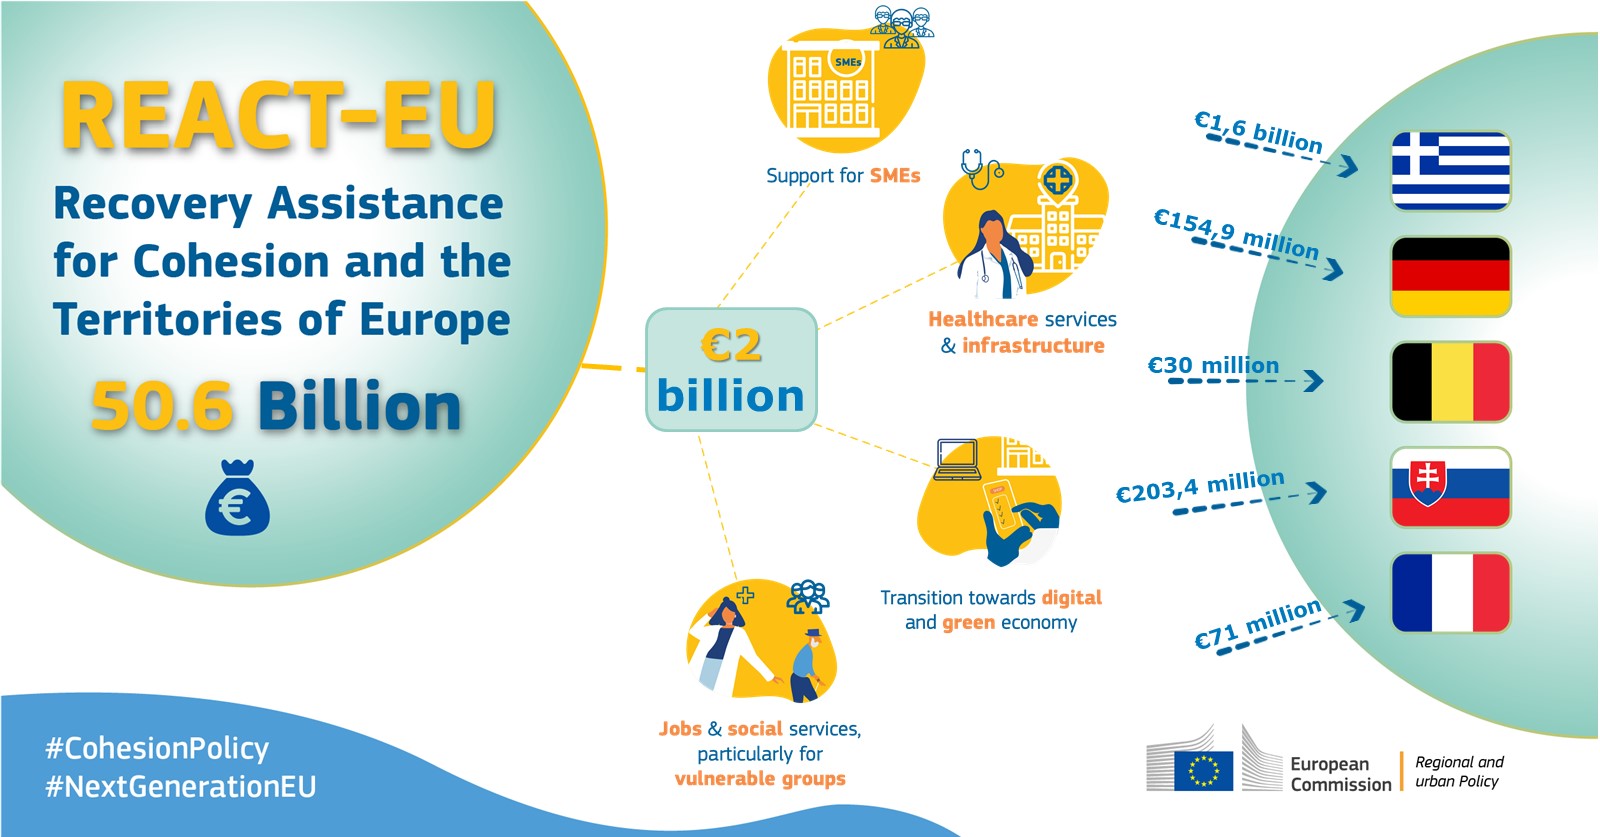 REACT-EU: more than €2 billion in additional cohesion funds for Greece, Germany, Belgium, Slovakia and France to invest in SMEs, skills, IT and more